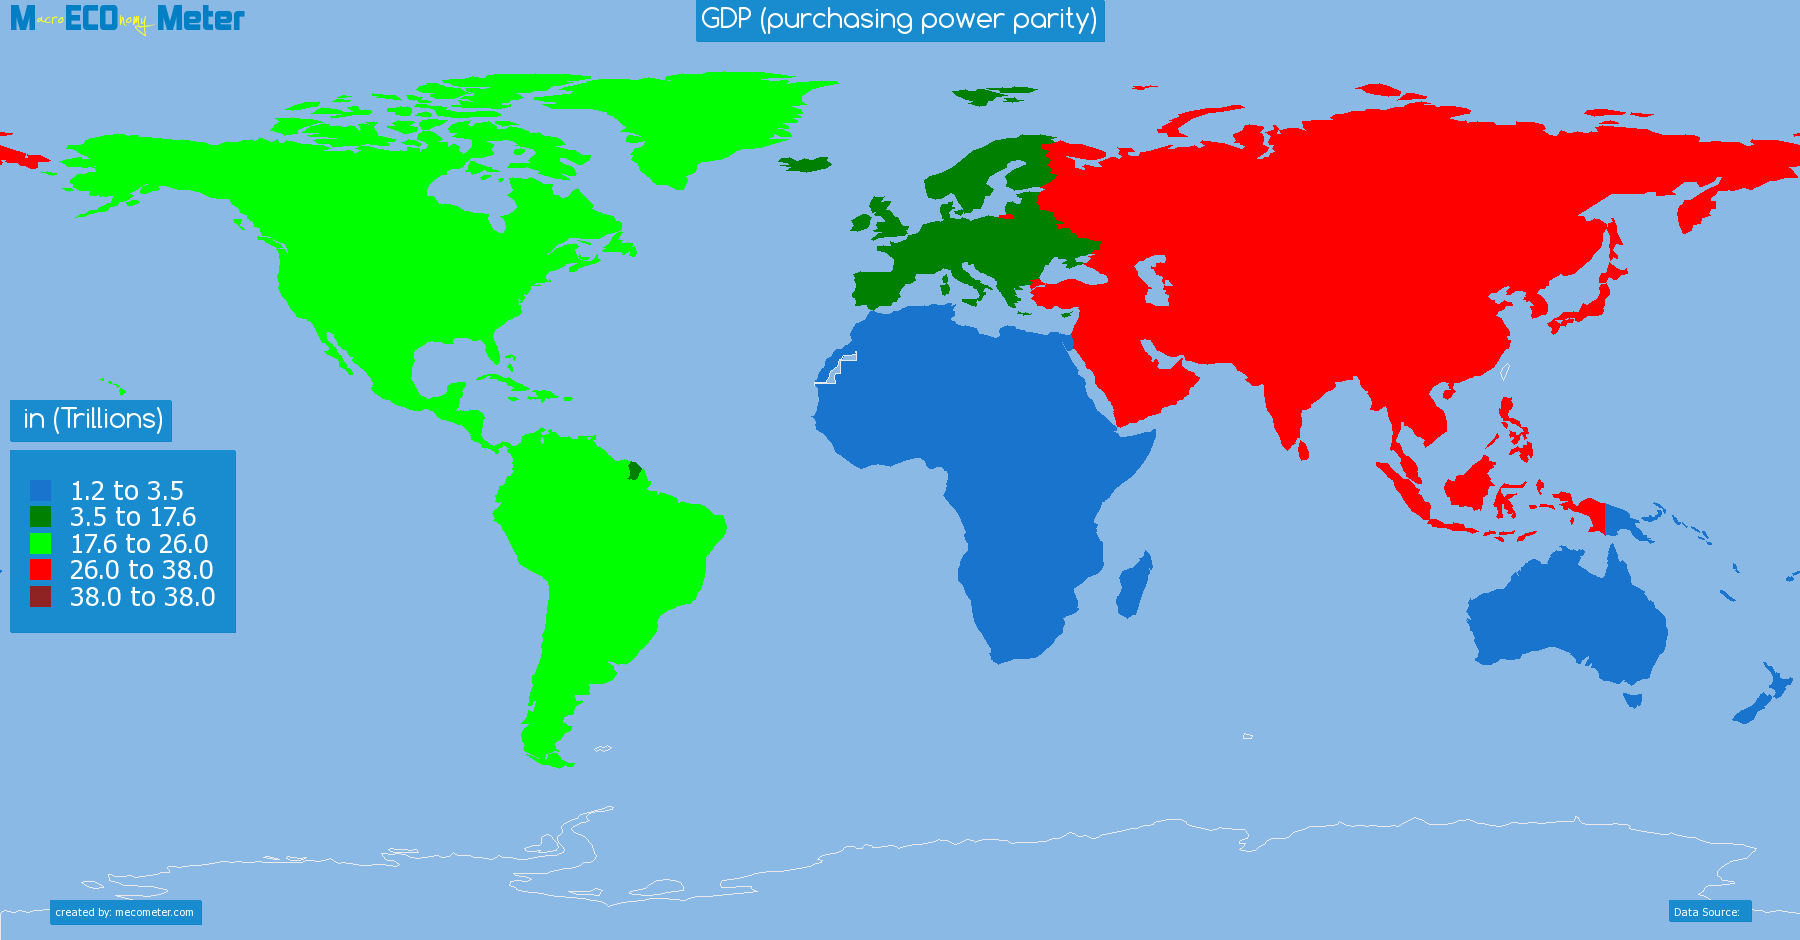 GDP (purchasing power parity) by continent